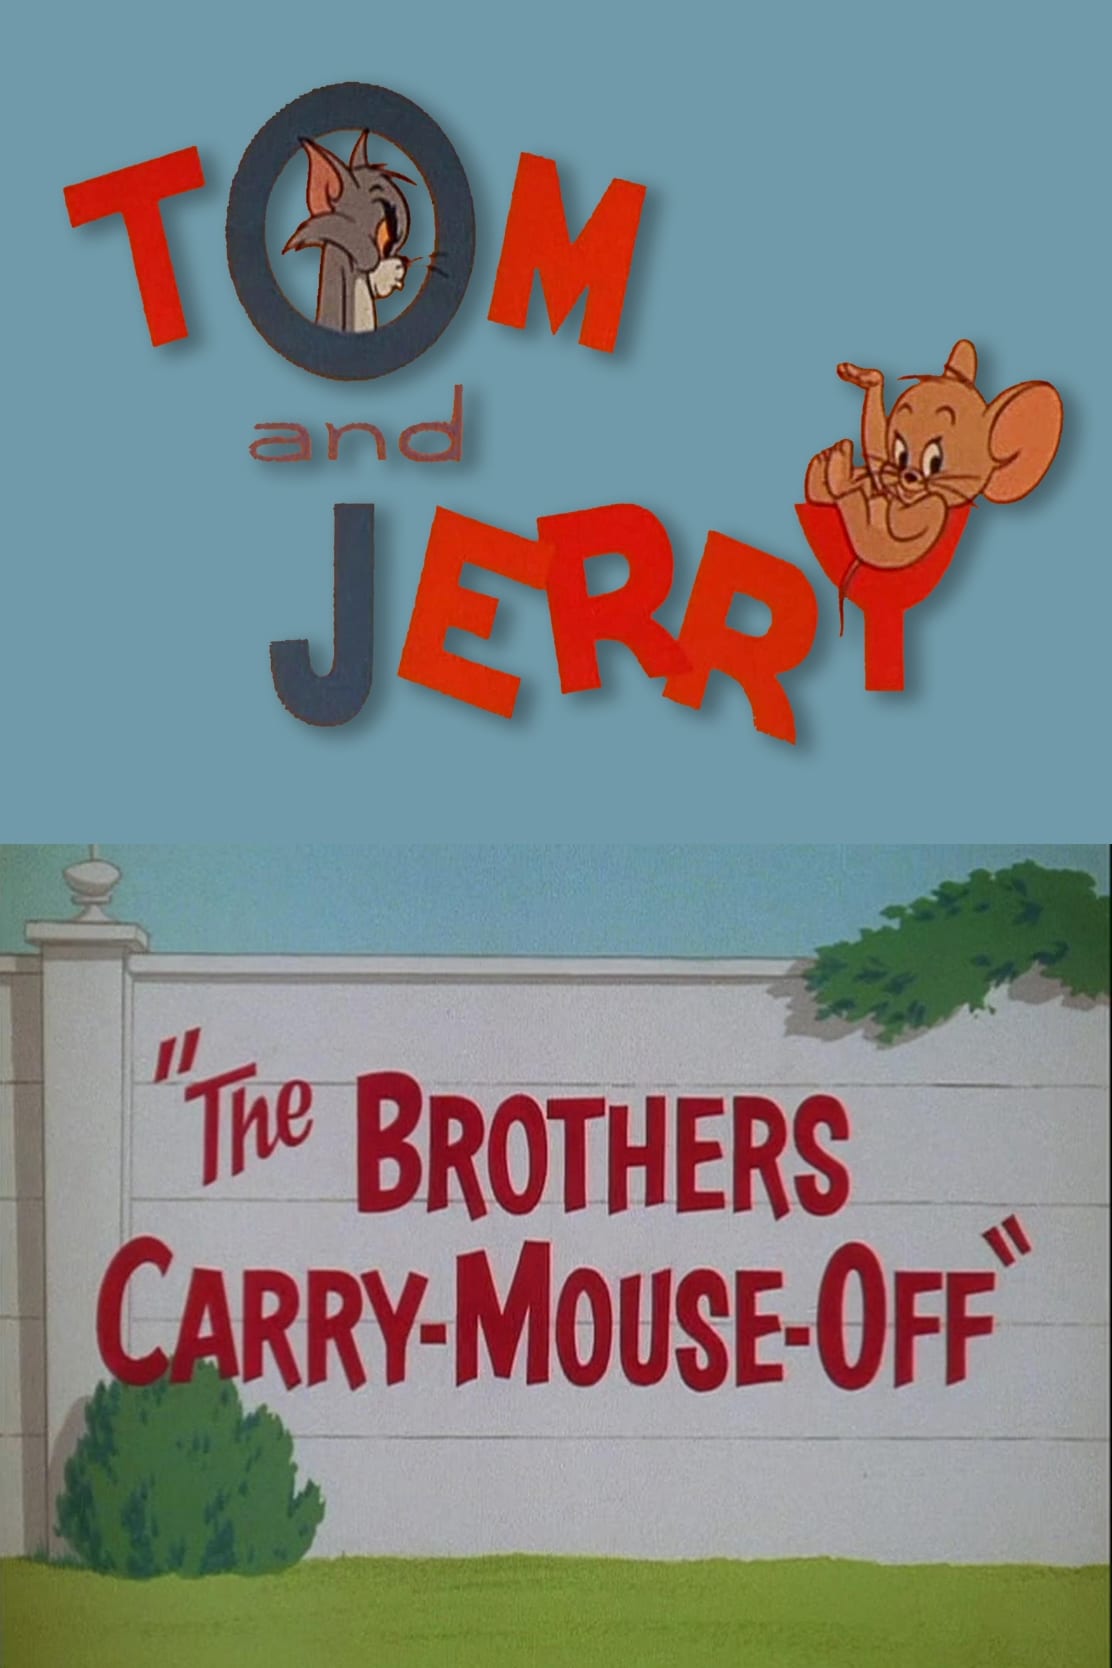 The Brothers Carry-Mouse-Off